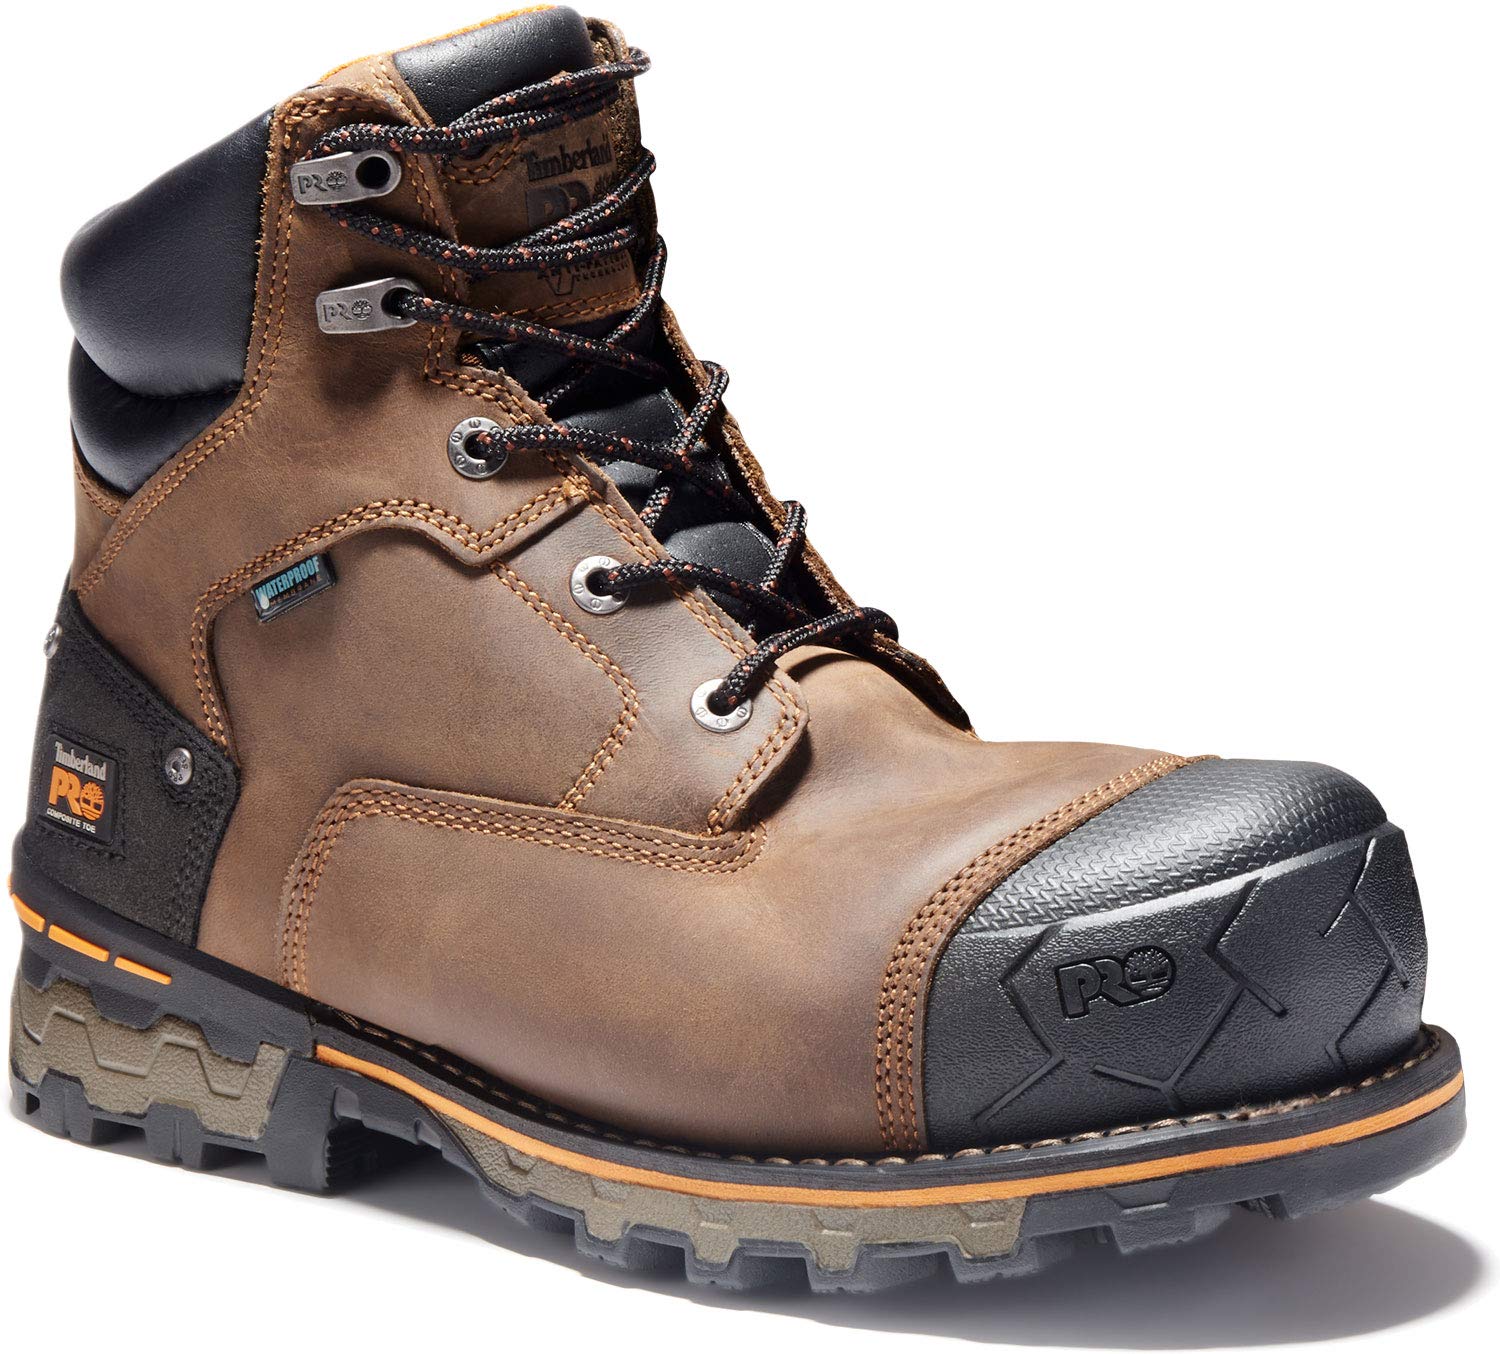 Timberland PRO Men's Boondock 6 Inch Composite Safety Toe Waterproof 6 CT WP, Brown, 12 Wide